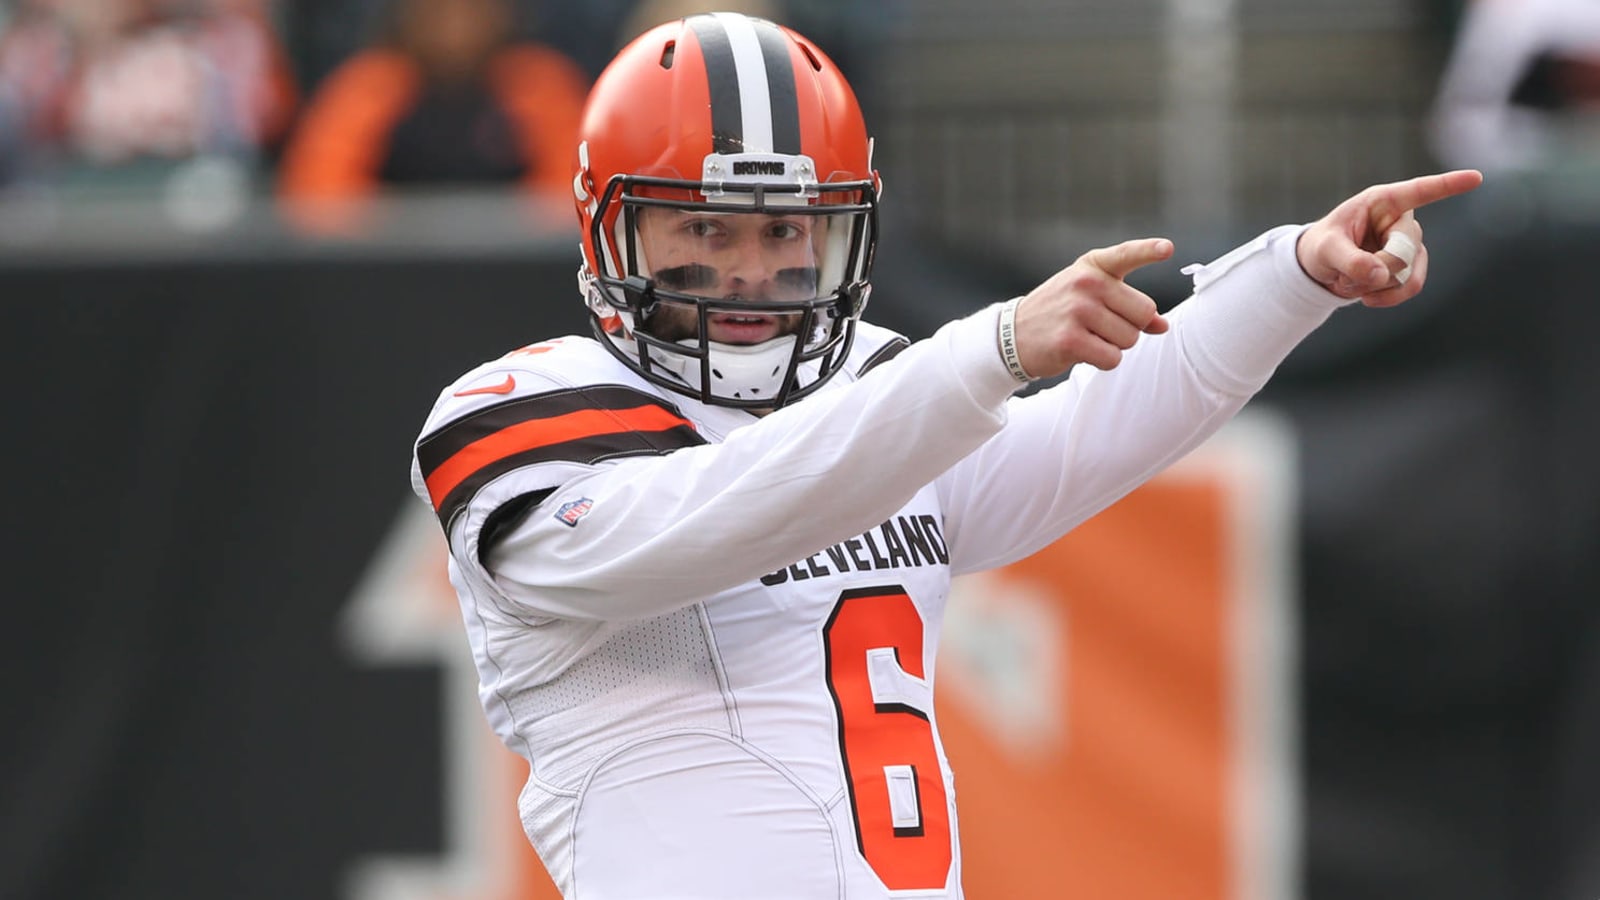 Who is the ideal coach to pair with Baker Mayfield in Cleveland?